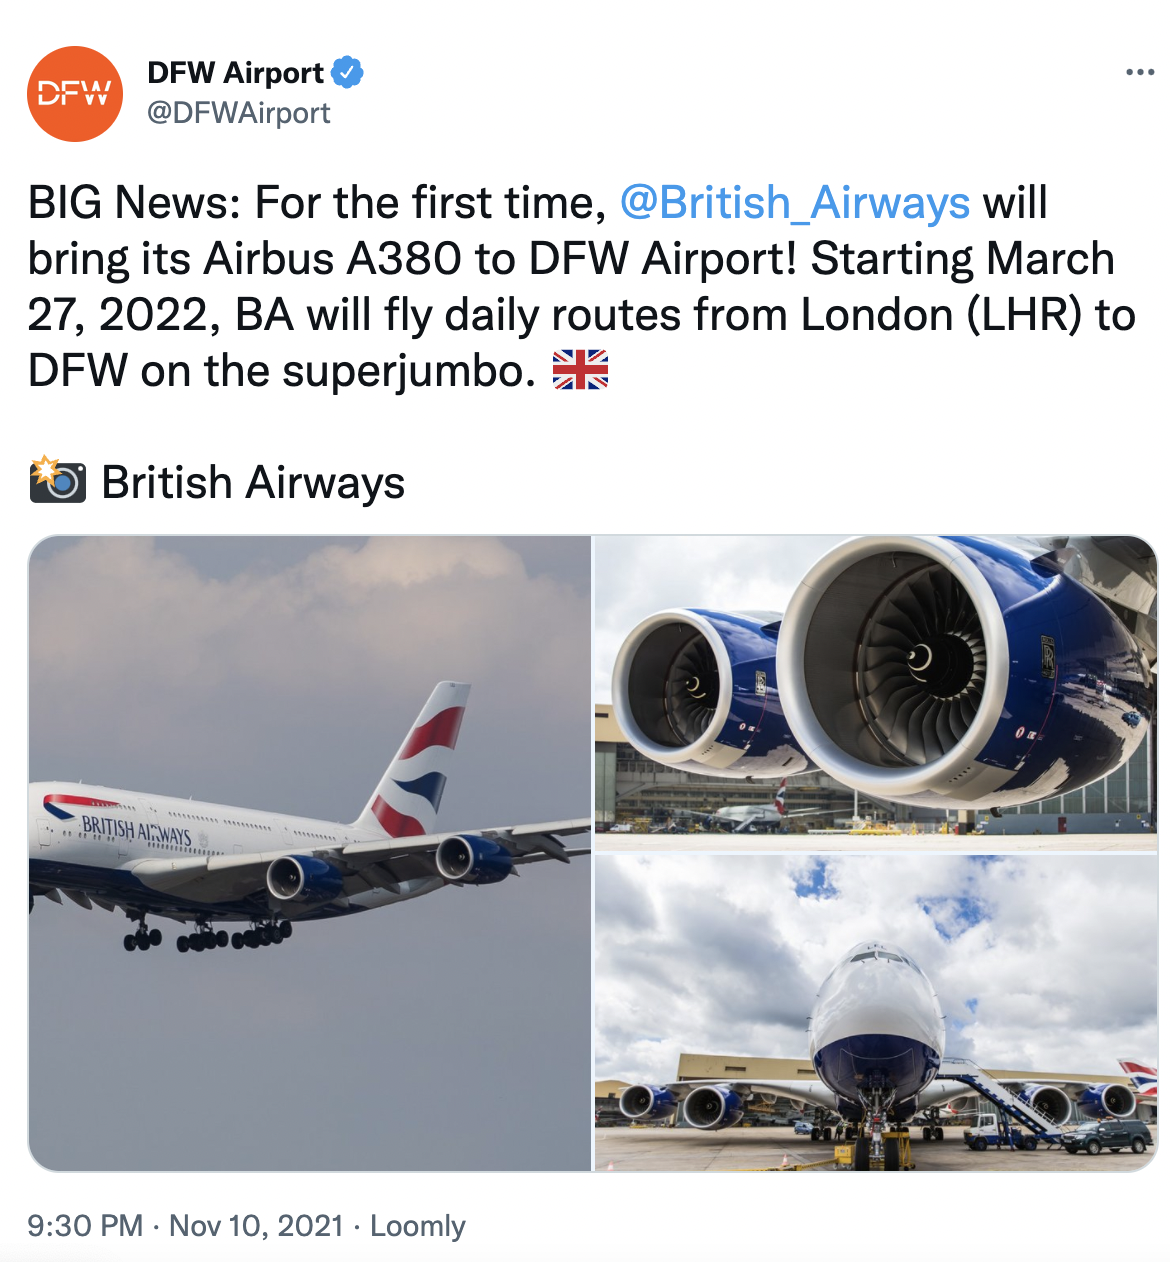 Dallas Fort Worth Airport, British Airways - Airbus A380 for business travel 